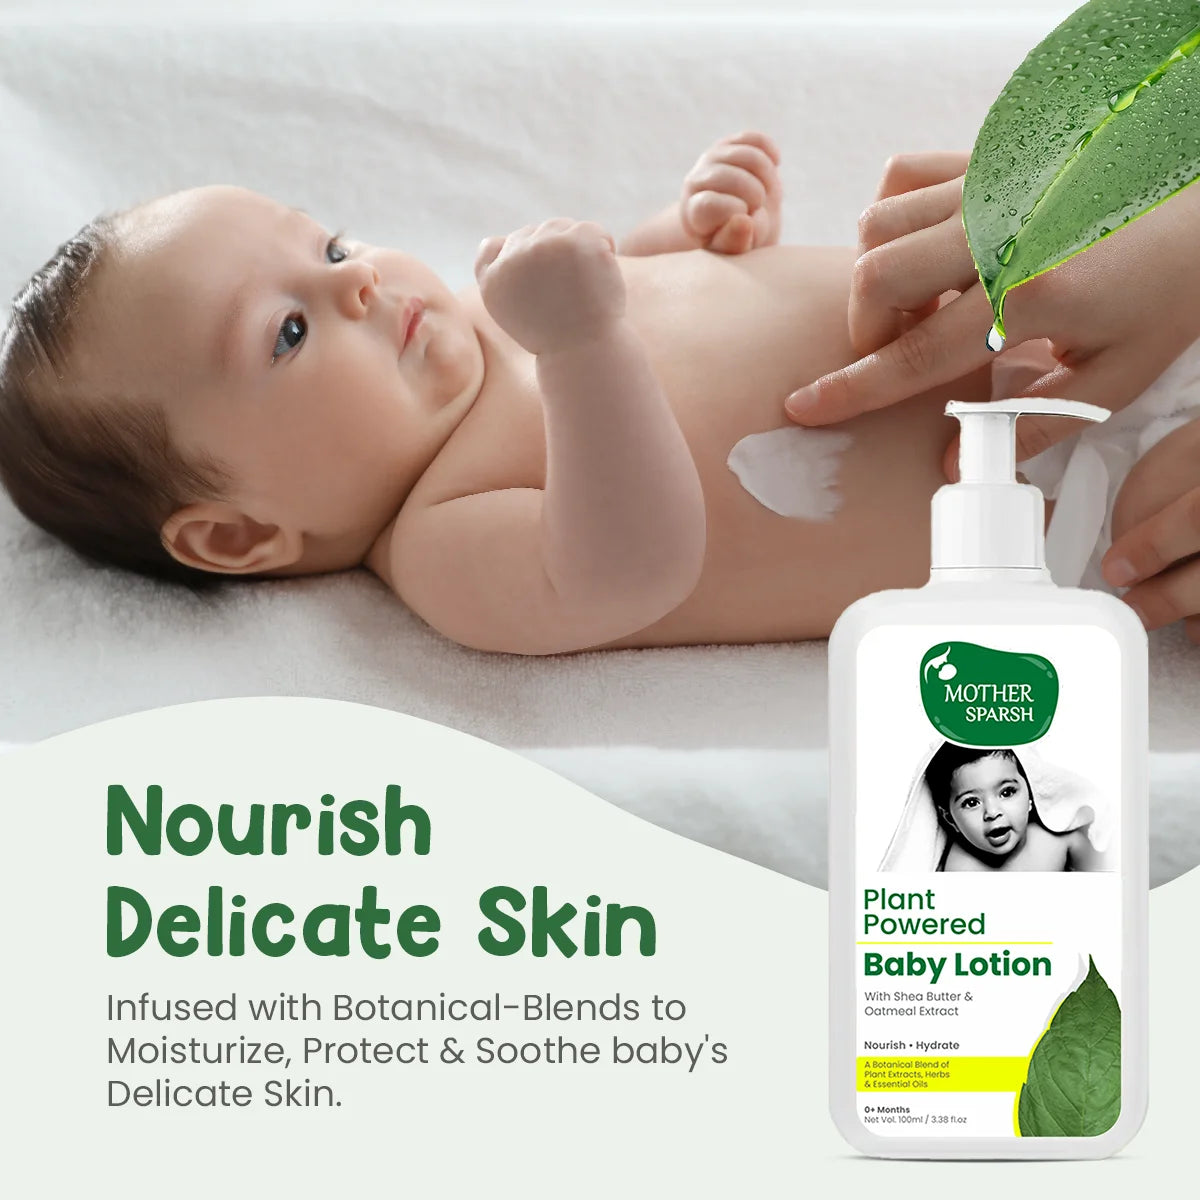 Plant Powered Baby Lotion